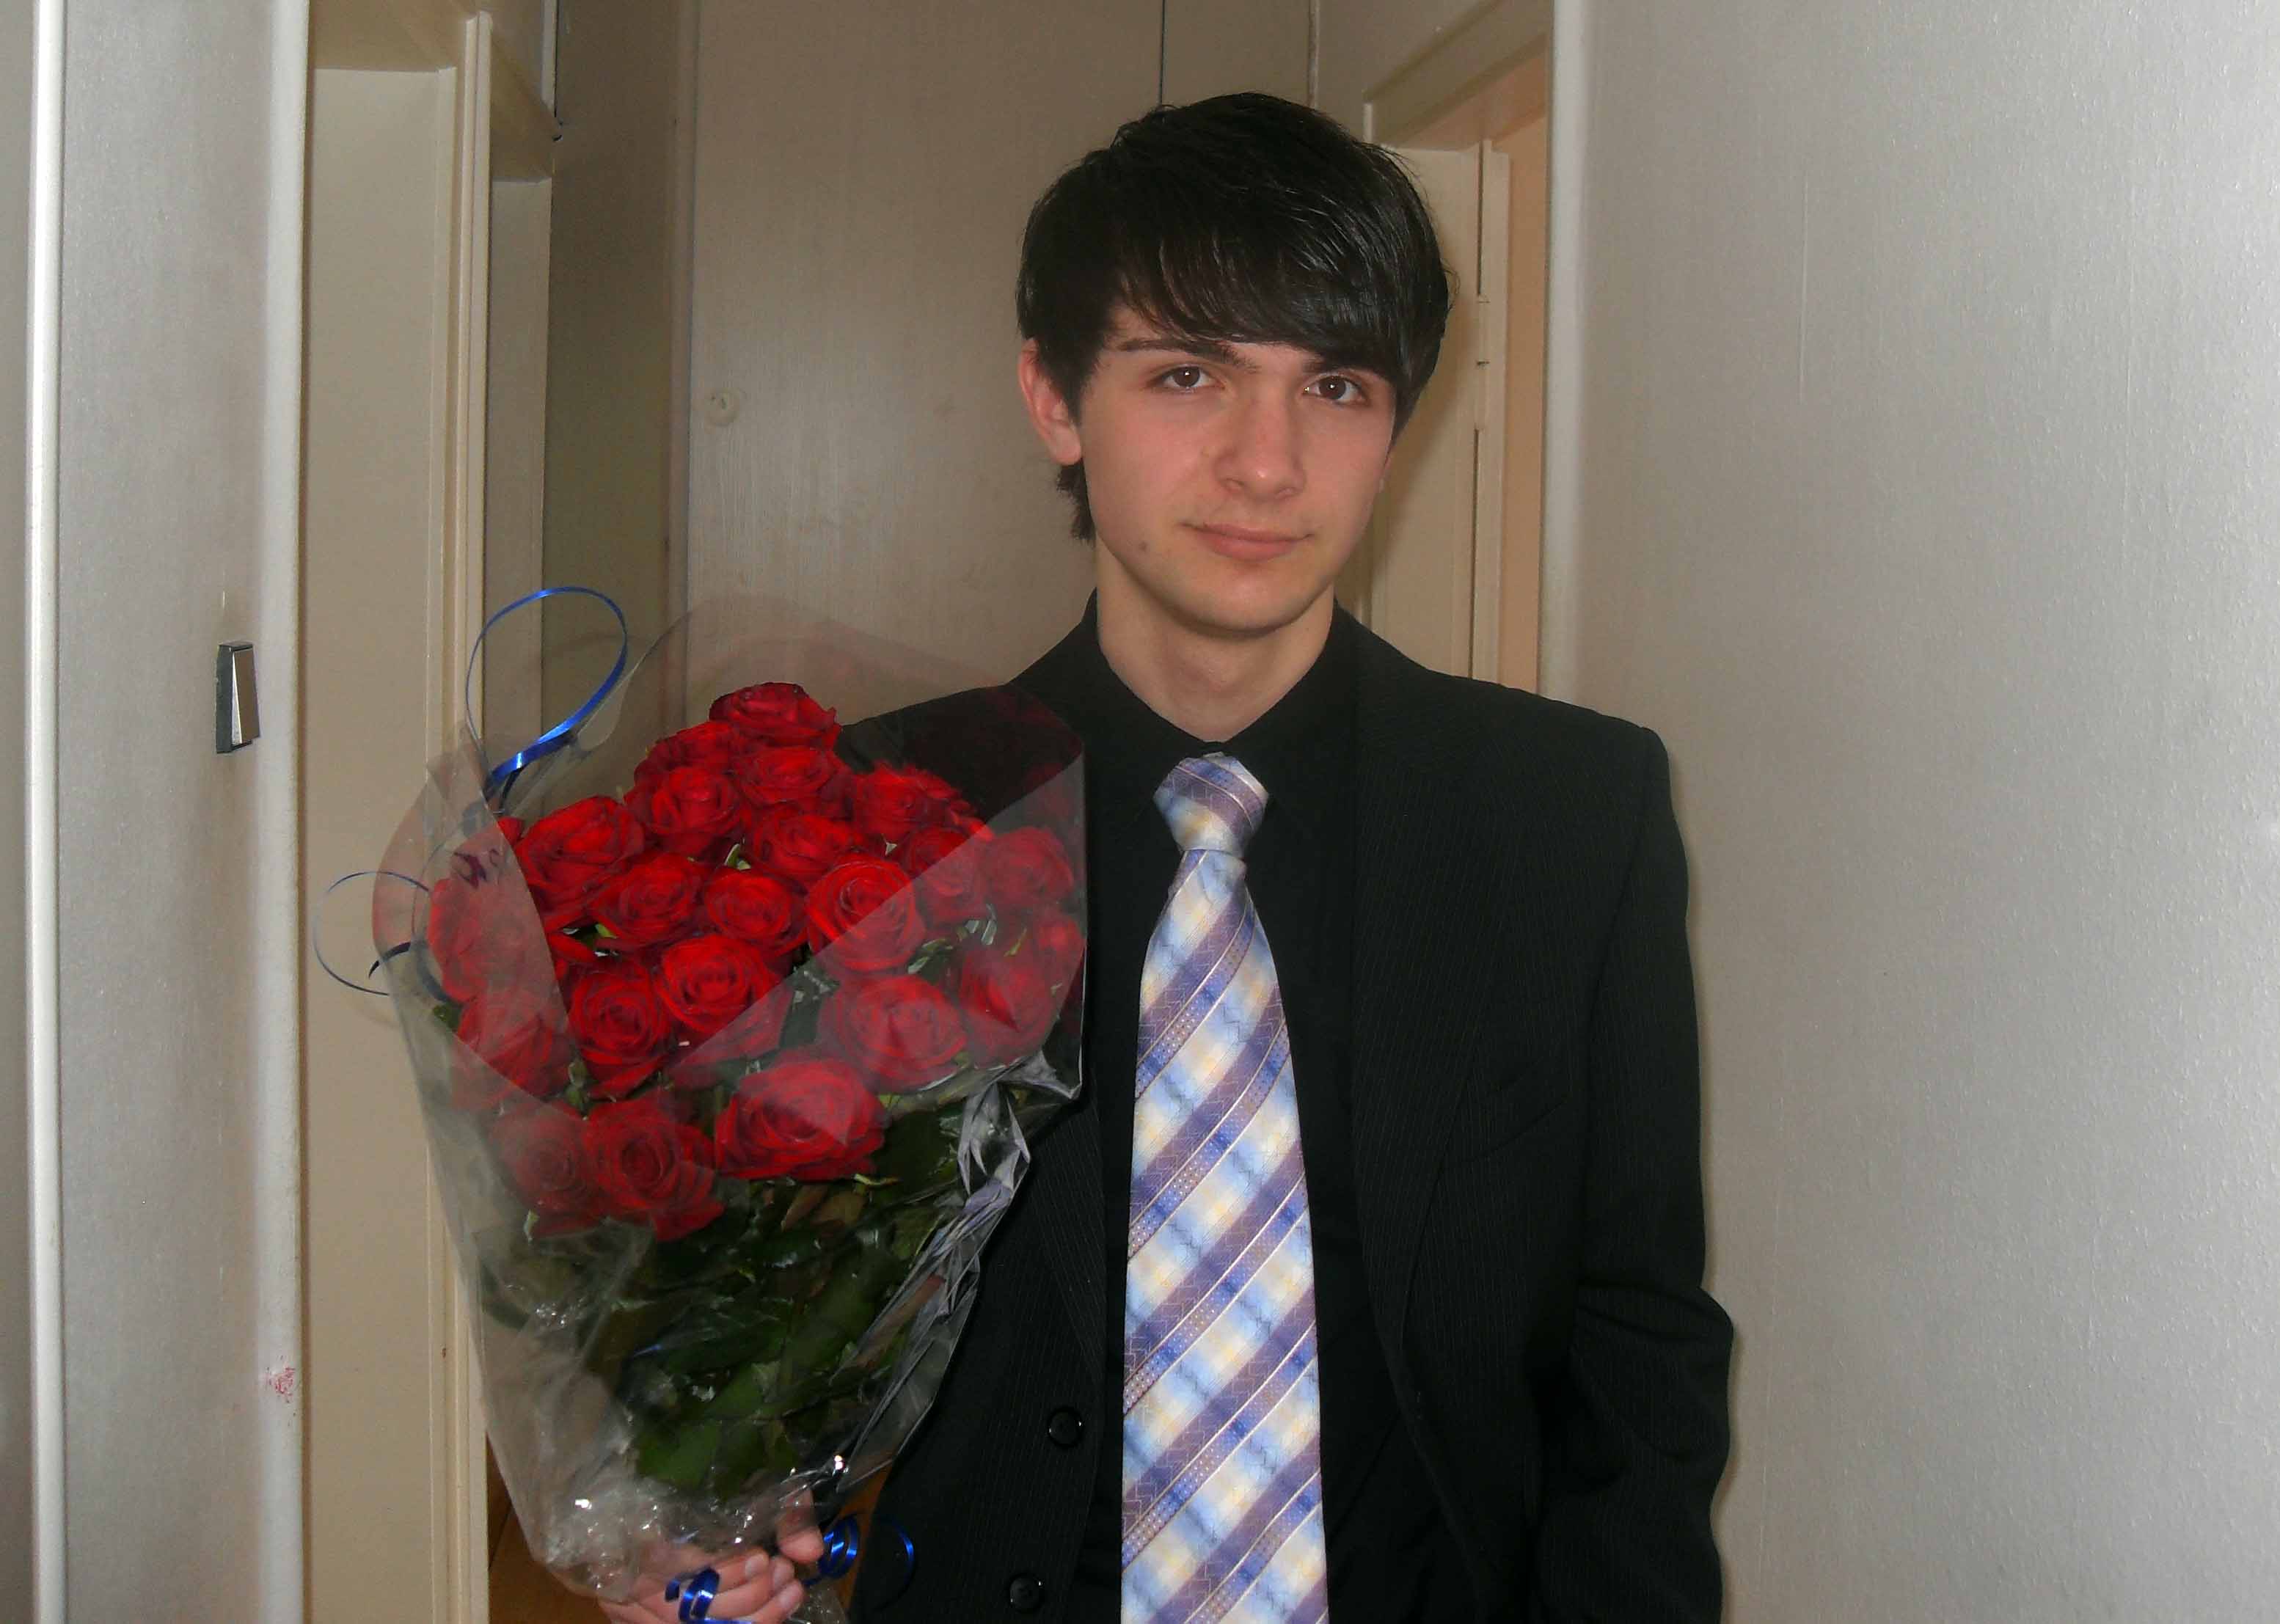 Alexander Fufaev goes to the prom (2010)